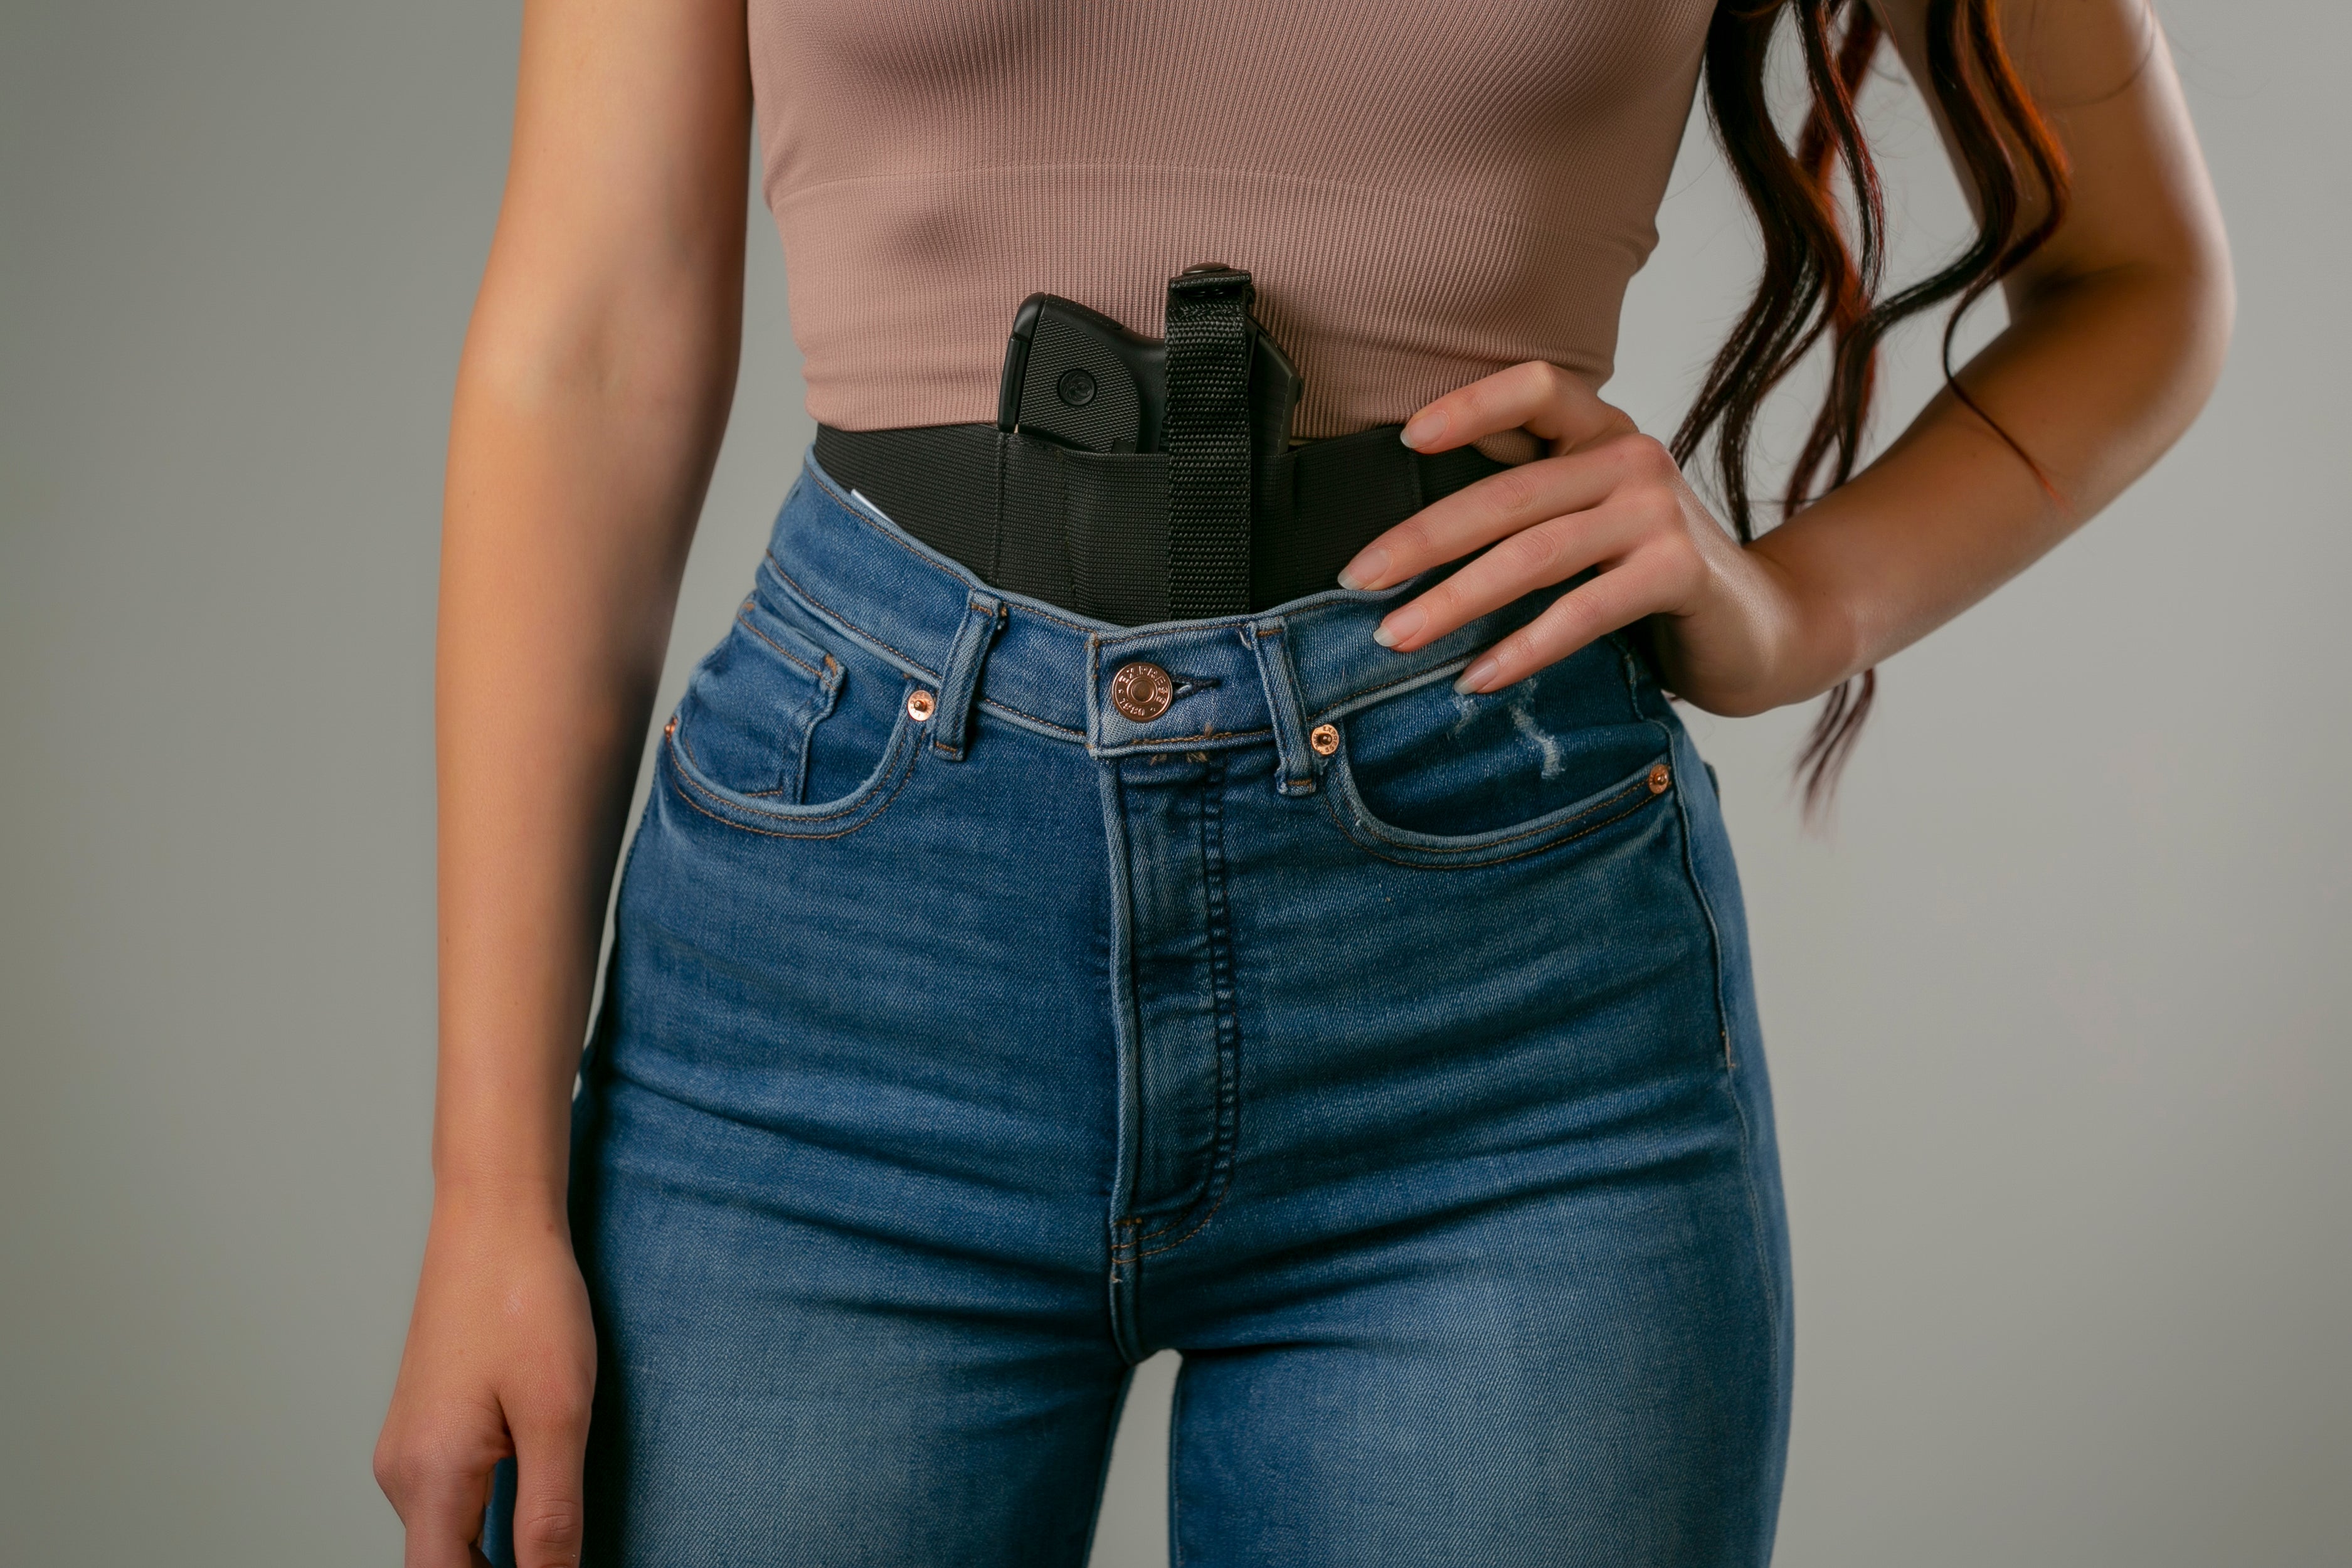 Shop Women's Concealed Carry Holsters